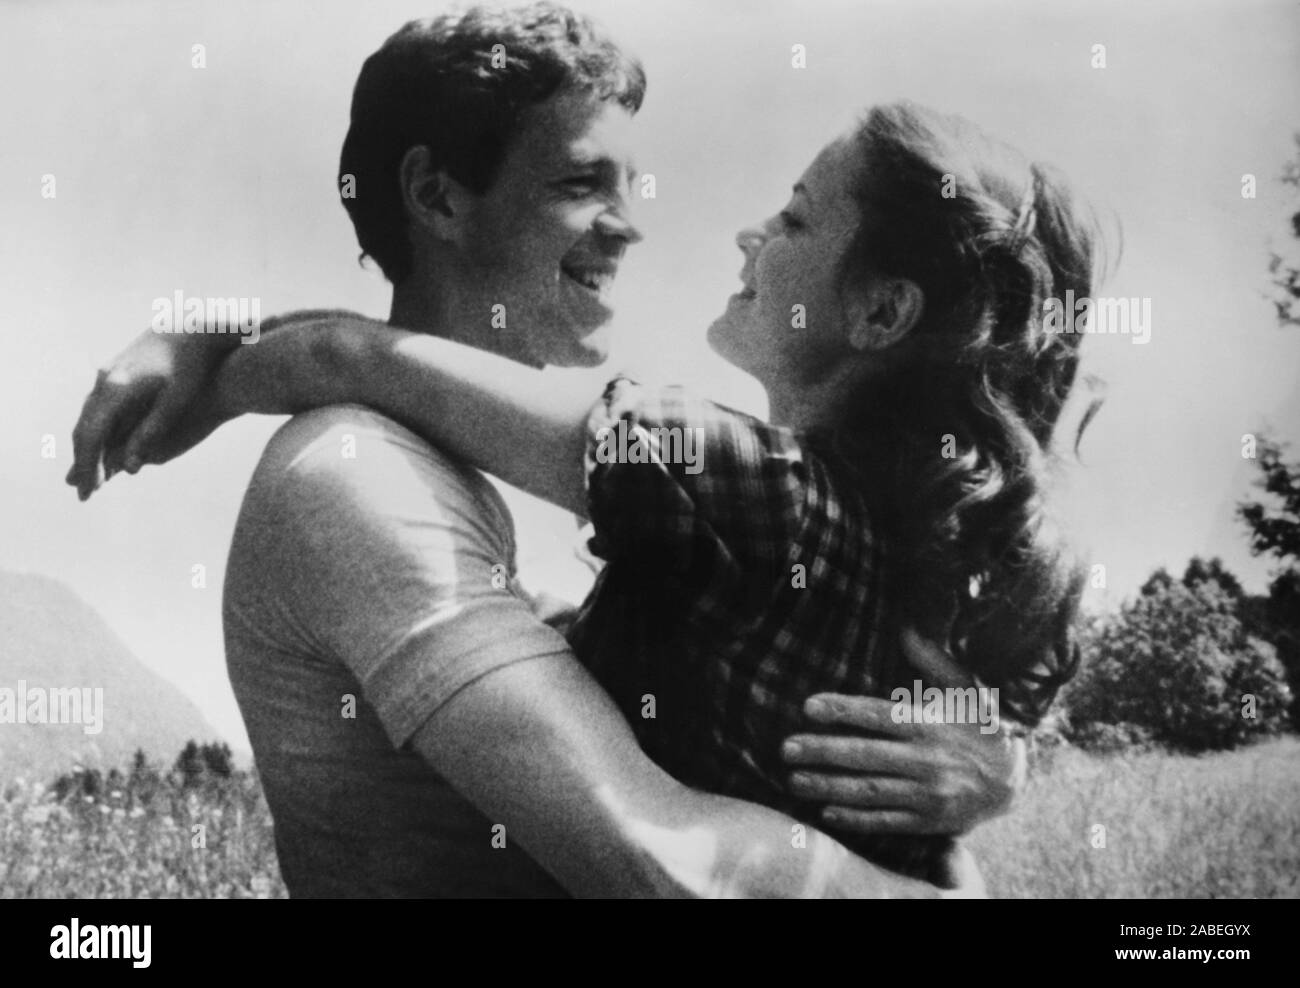 RAPE OF LOVE, (aka L'AMOUR VIOLE), from left: Alain Foures, Nathalie Nell,  1978. © Quartet Films /Courtesy Everett Collection Stock Photo - Alamy